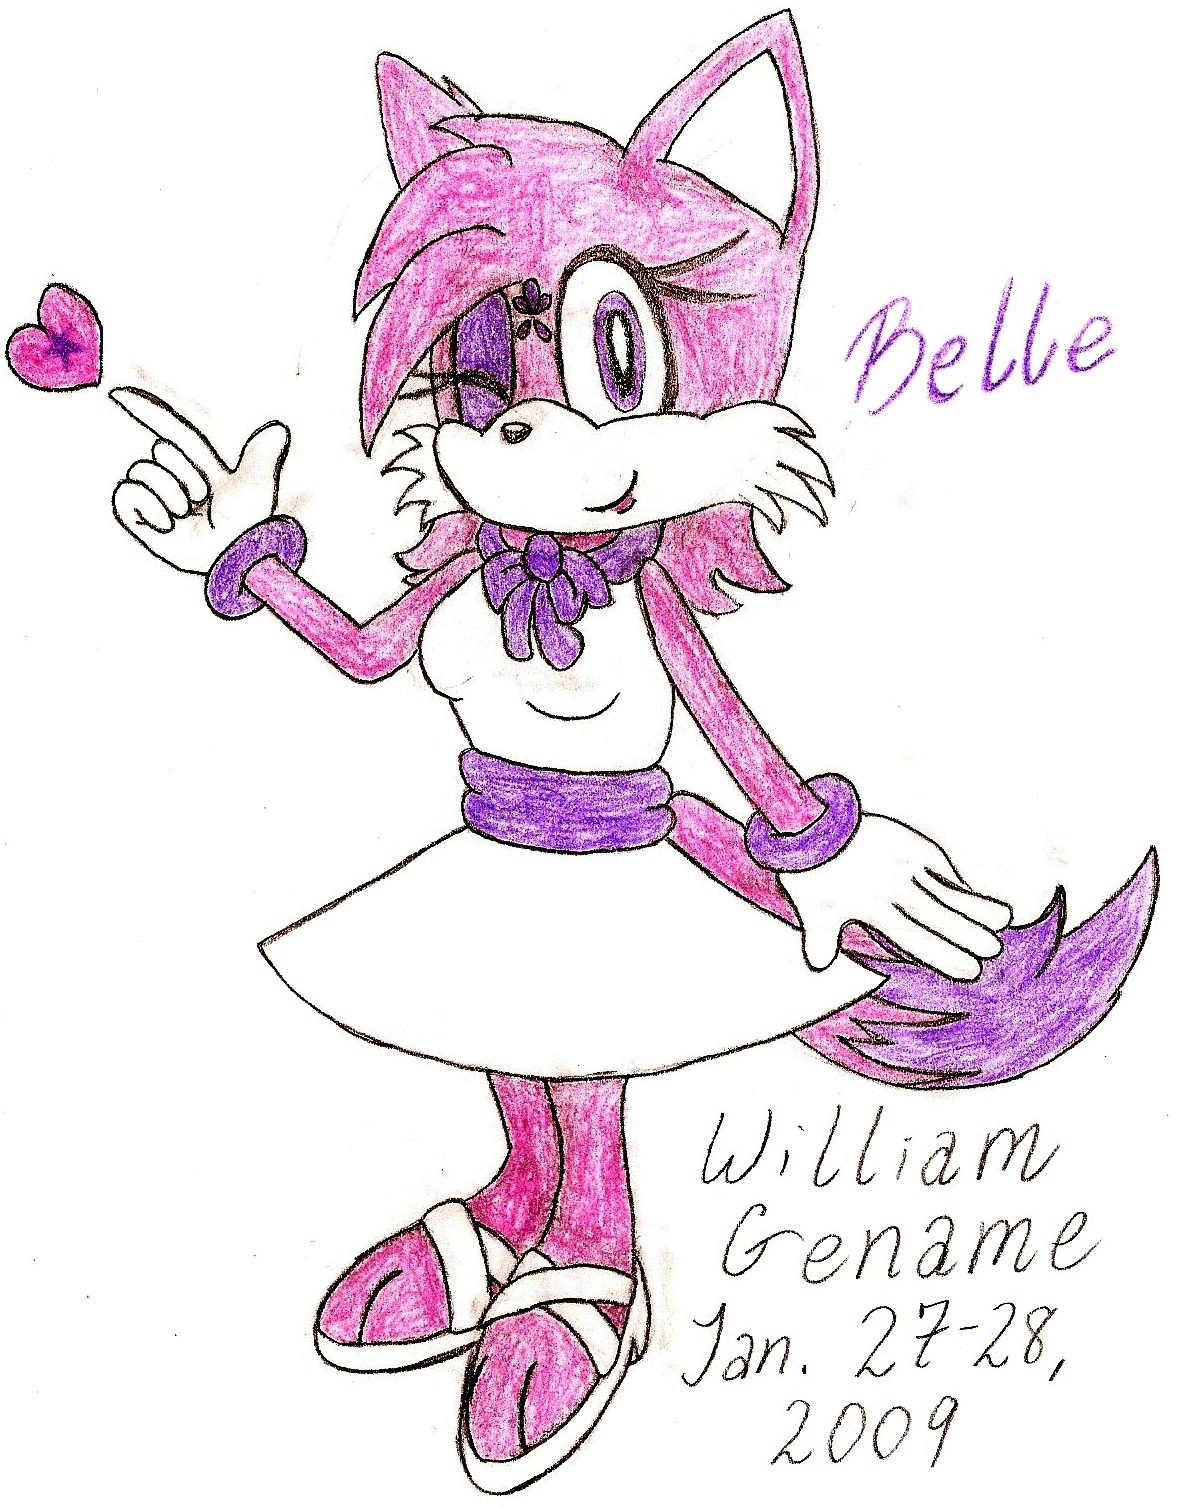 Gene5i5's Belle by germanname